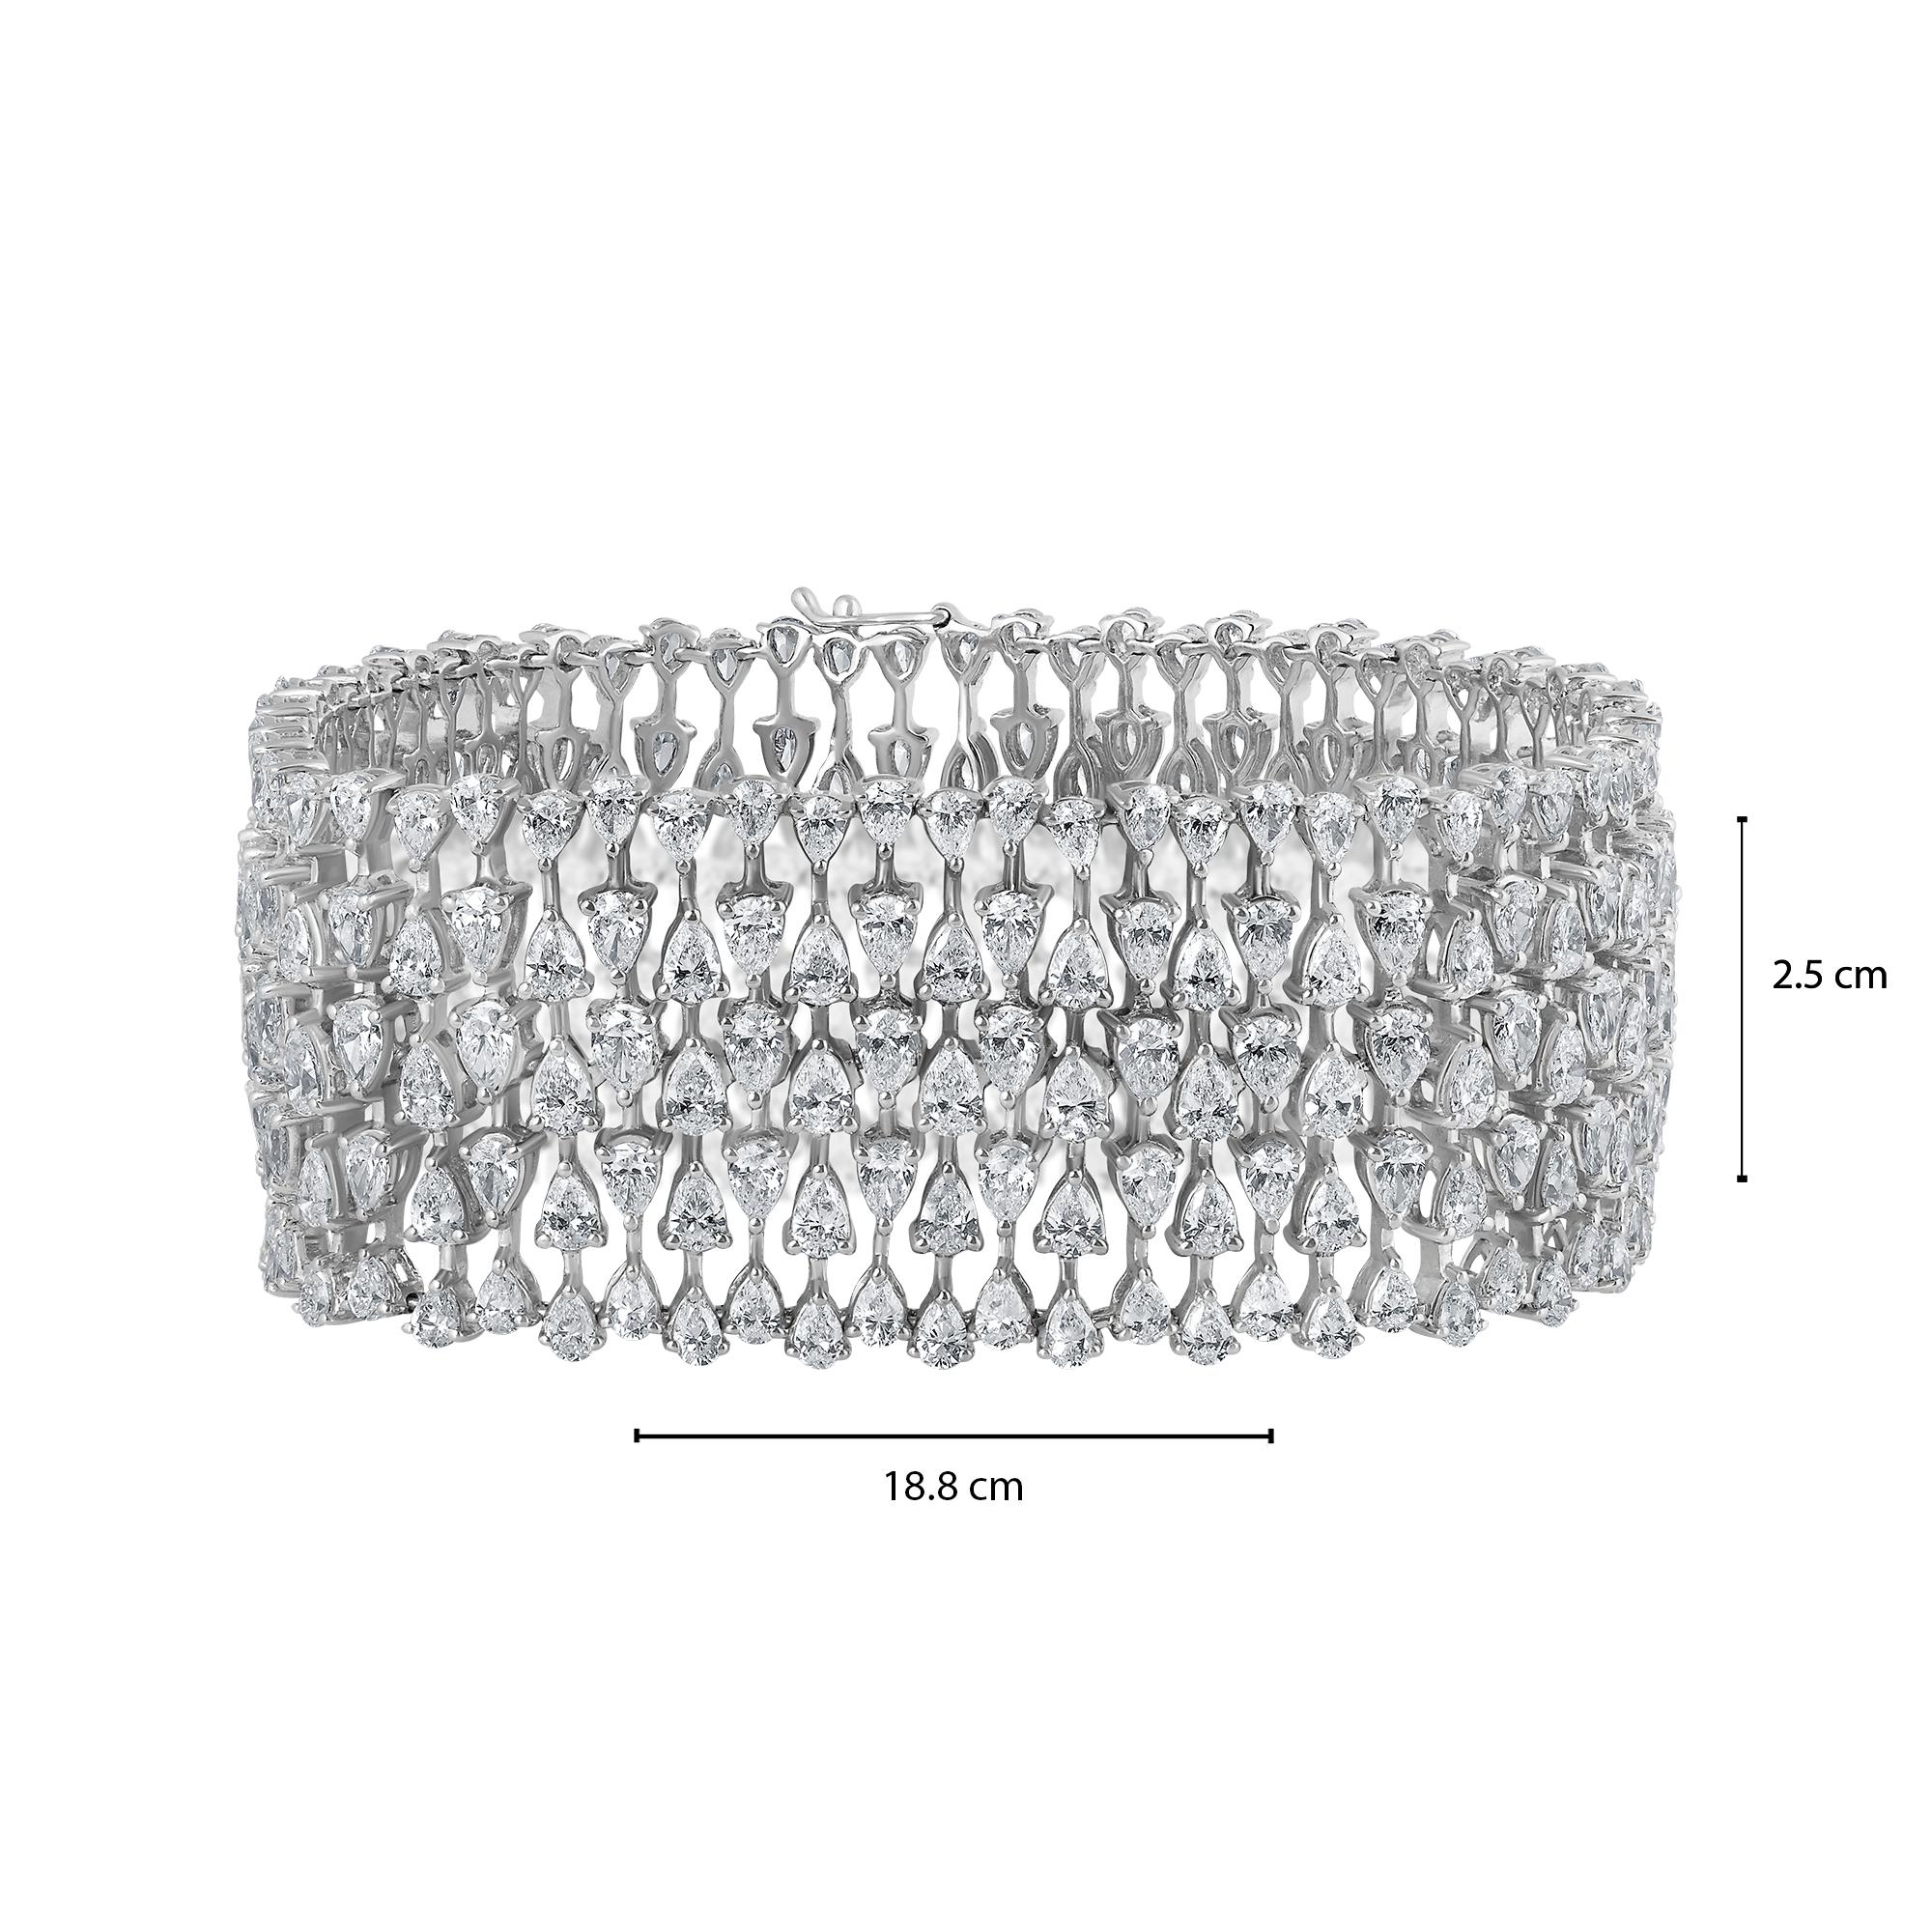 Hand made in the Emilio Jewelry Factory. Here are the details
Metal: 18k
Natural Diamonds: 330 diamonds totaling 21.23 carats 
Color/Clarity: E color Vvs1 clarity 
Cut: excellent 
Width: 1.25 inches wide! 
length: 7 inches can be shorter or longer